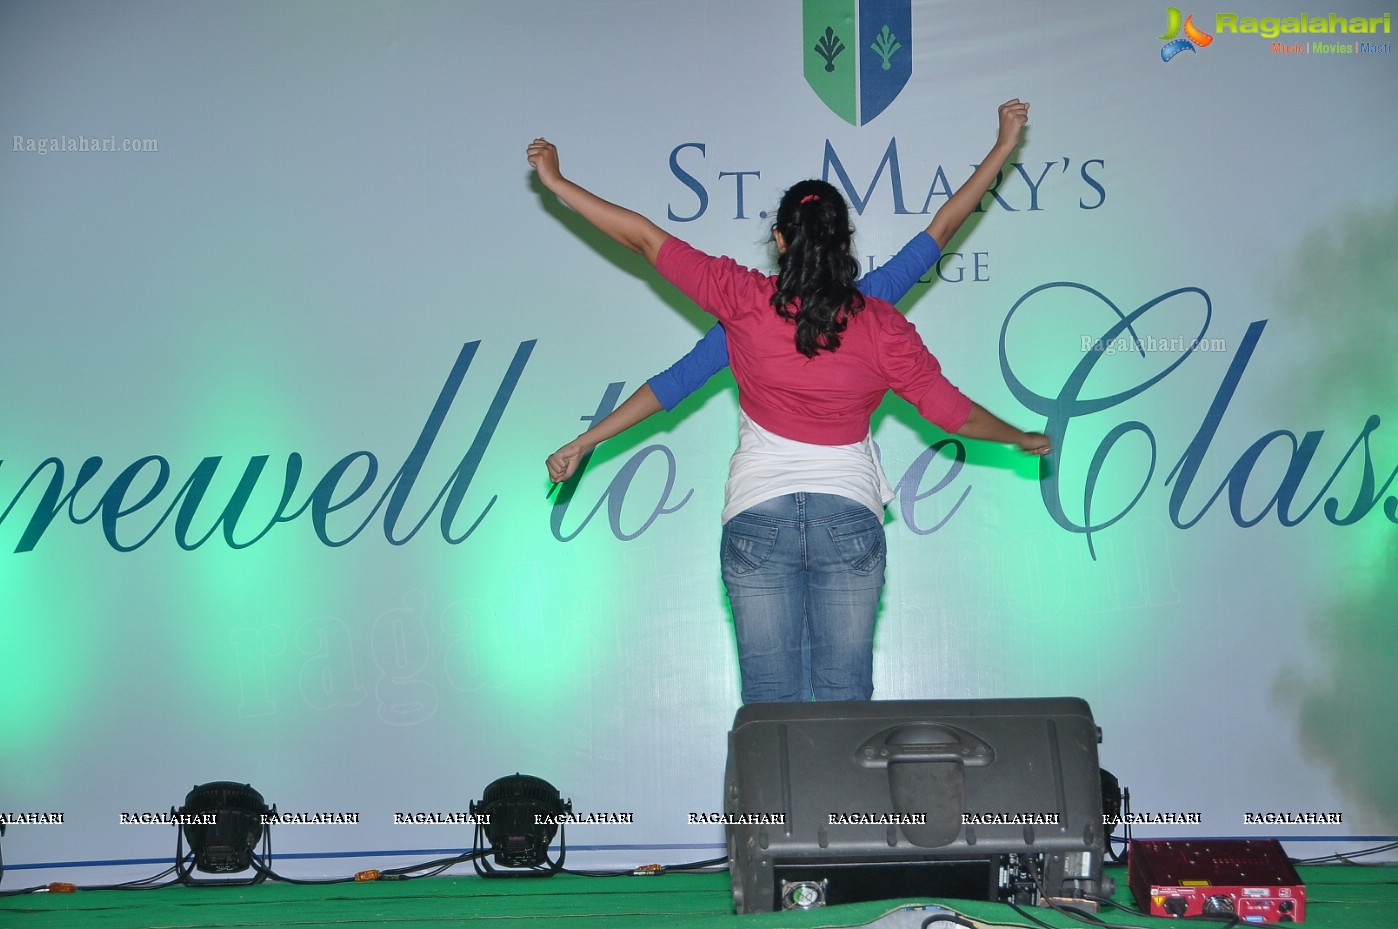 St. Mary's College 2013 Farewell Party, Yousufguda, Hyderabad